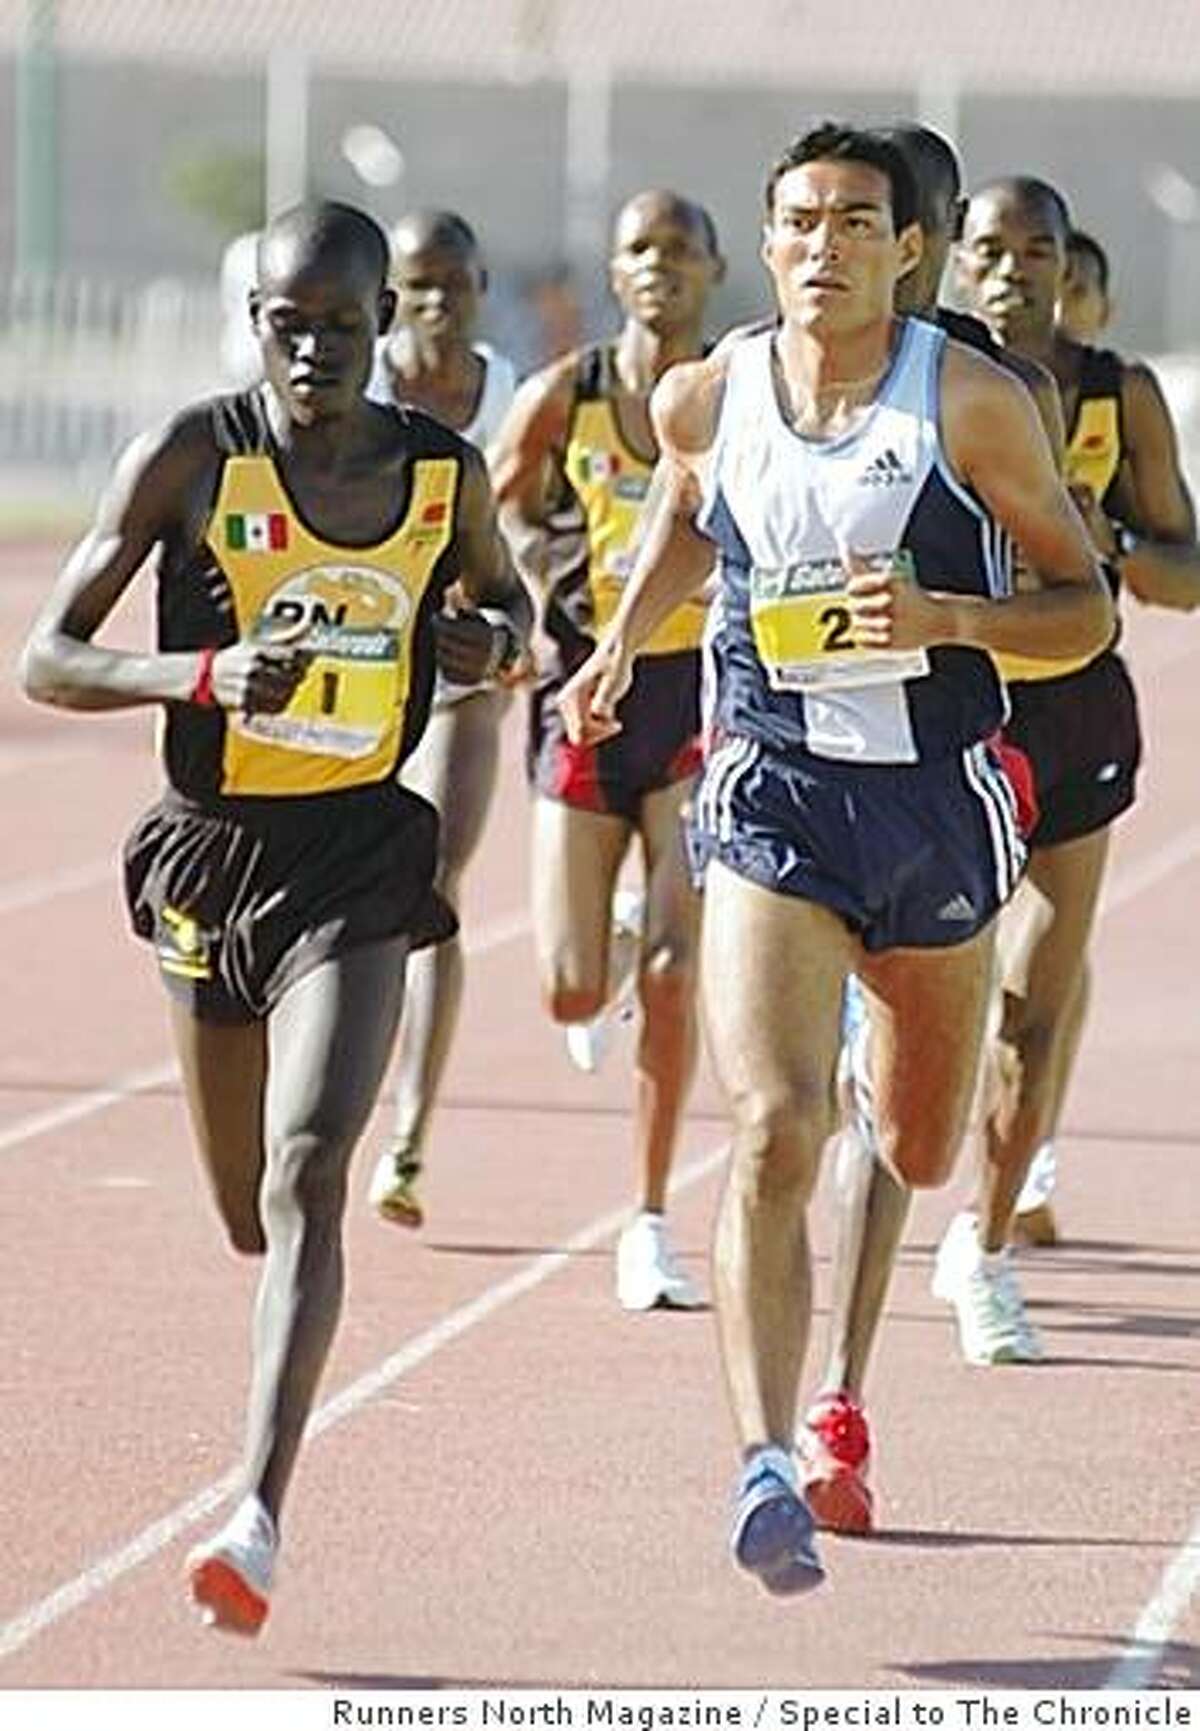 Kenyan and Mexican runners competing at a 5- kilometer race in Torreon, Mexico in 2005.